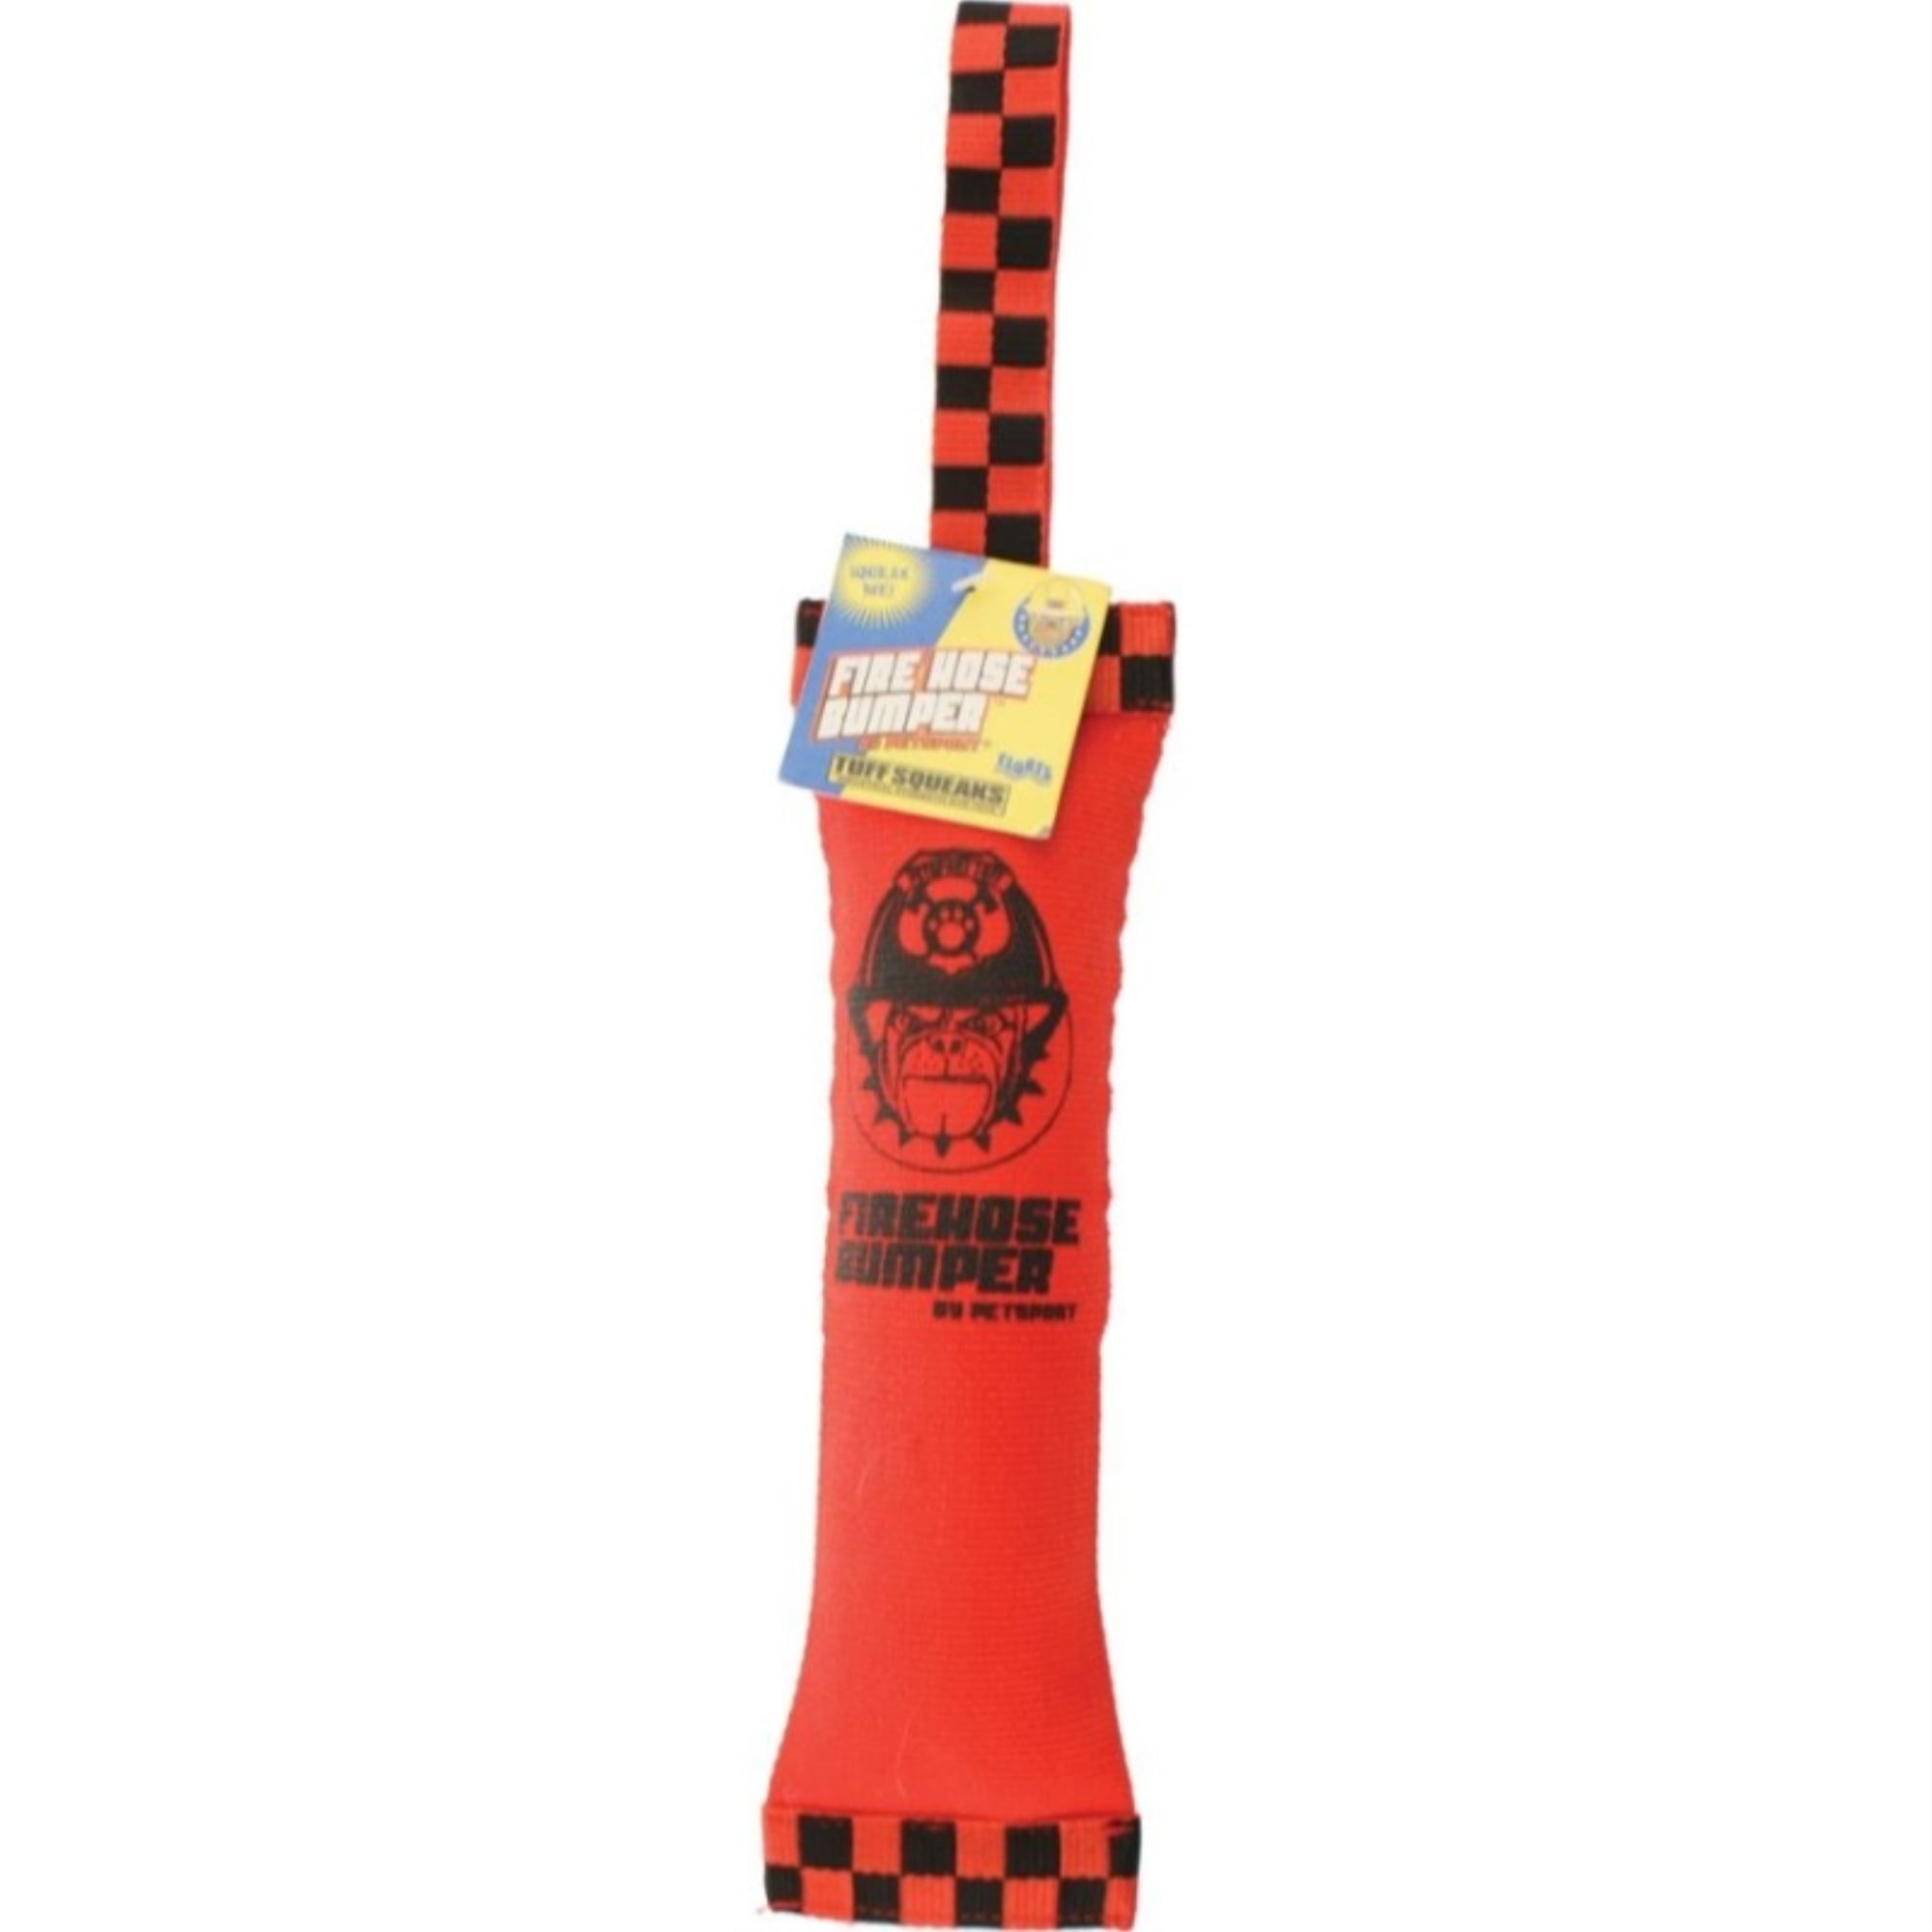 Picture of PetSport PS60032 12 in. Tuff Squeaks Fire Hose Bumper